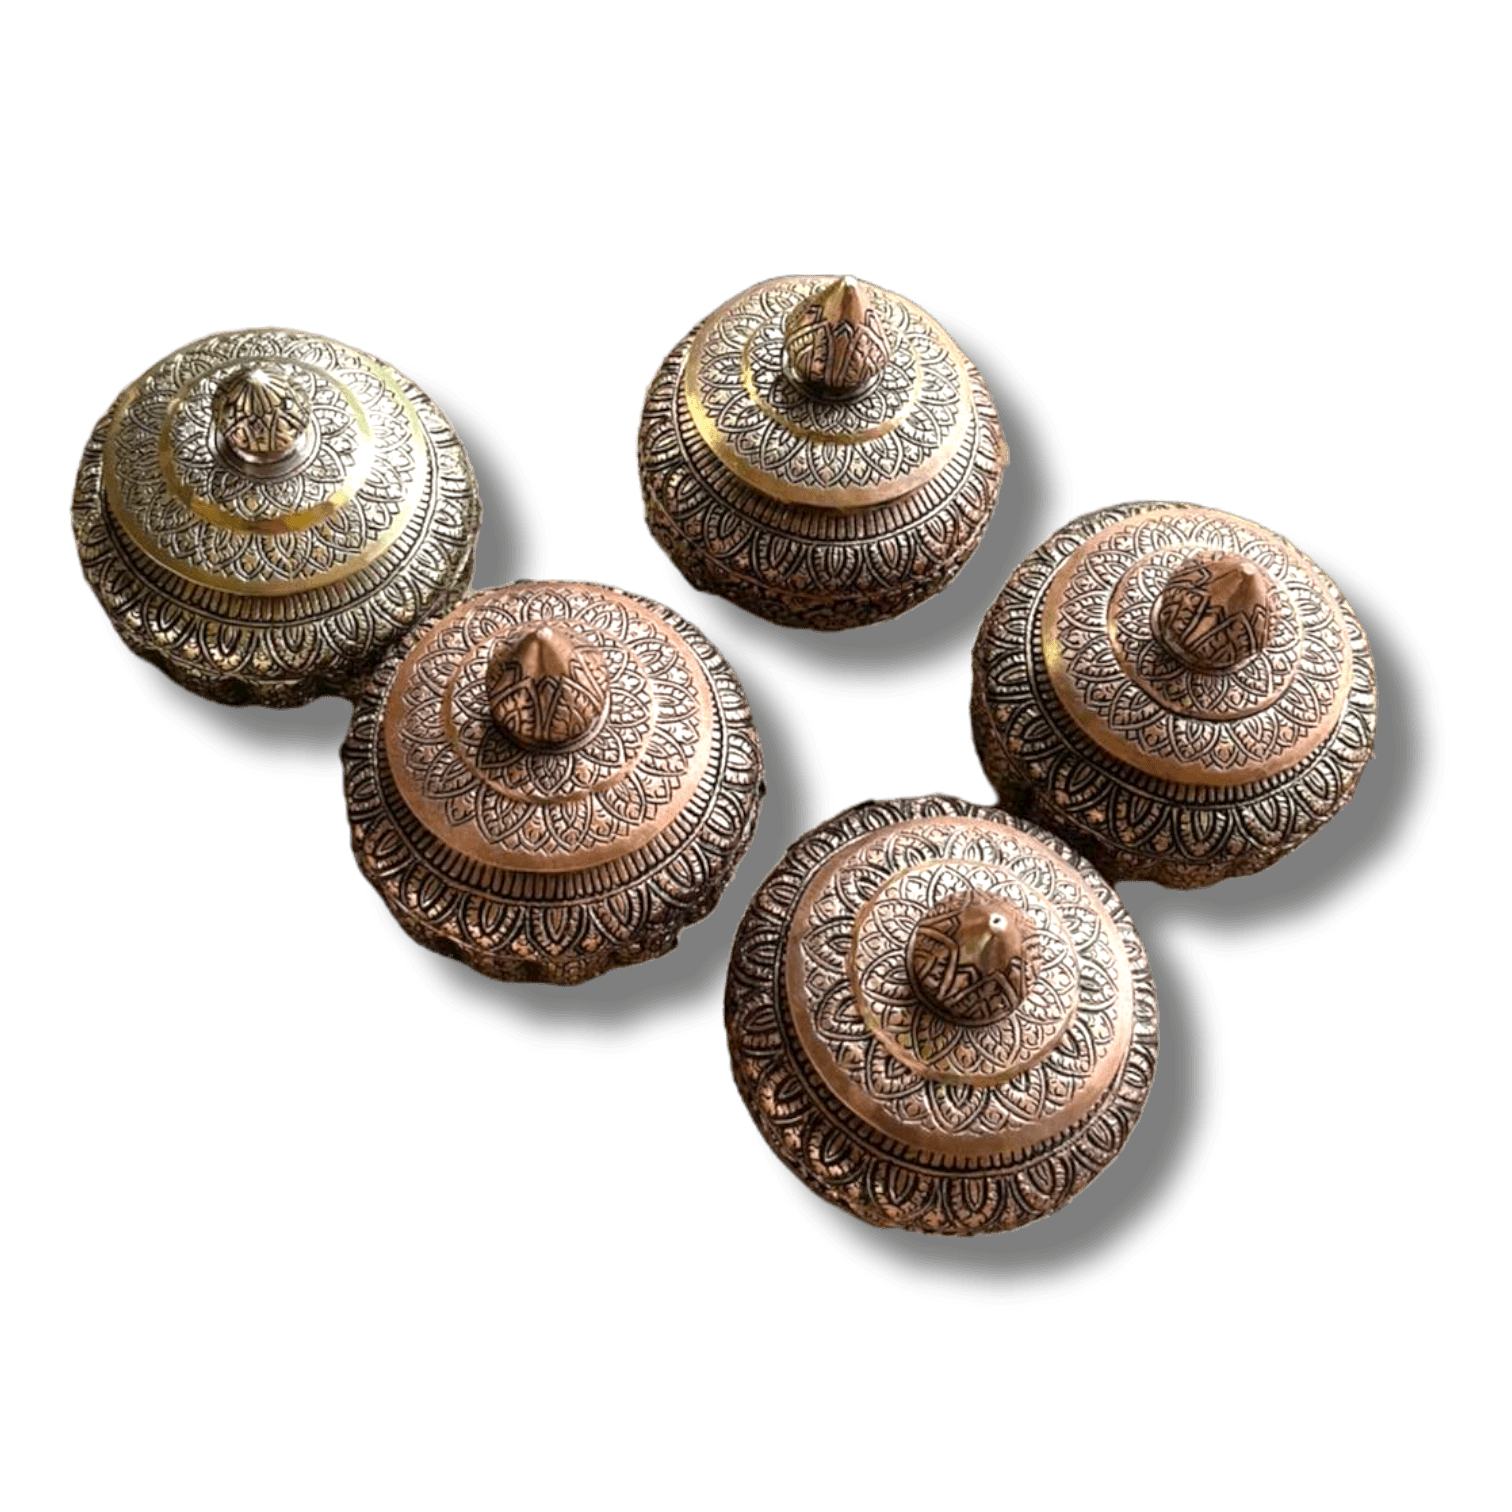 Mini Hand Engraved Solid Brass Niello Round Betel Box - Hanuman Hand Engraved Solid Brass Niello Betel Box with Lotus Lid - Ramayana 